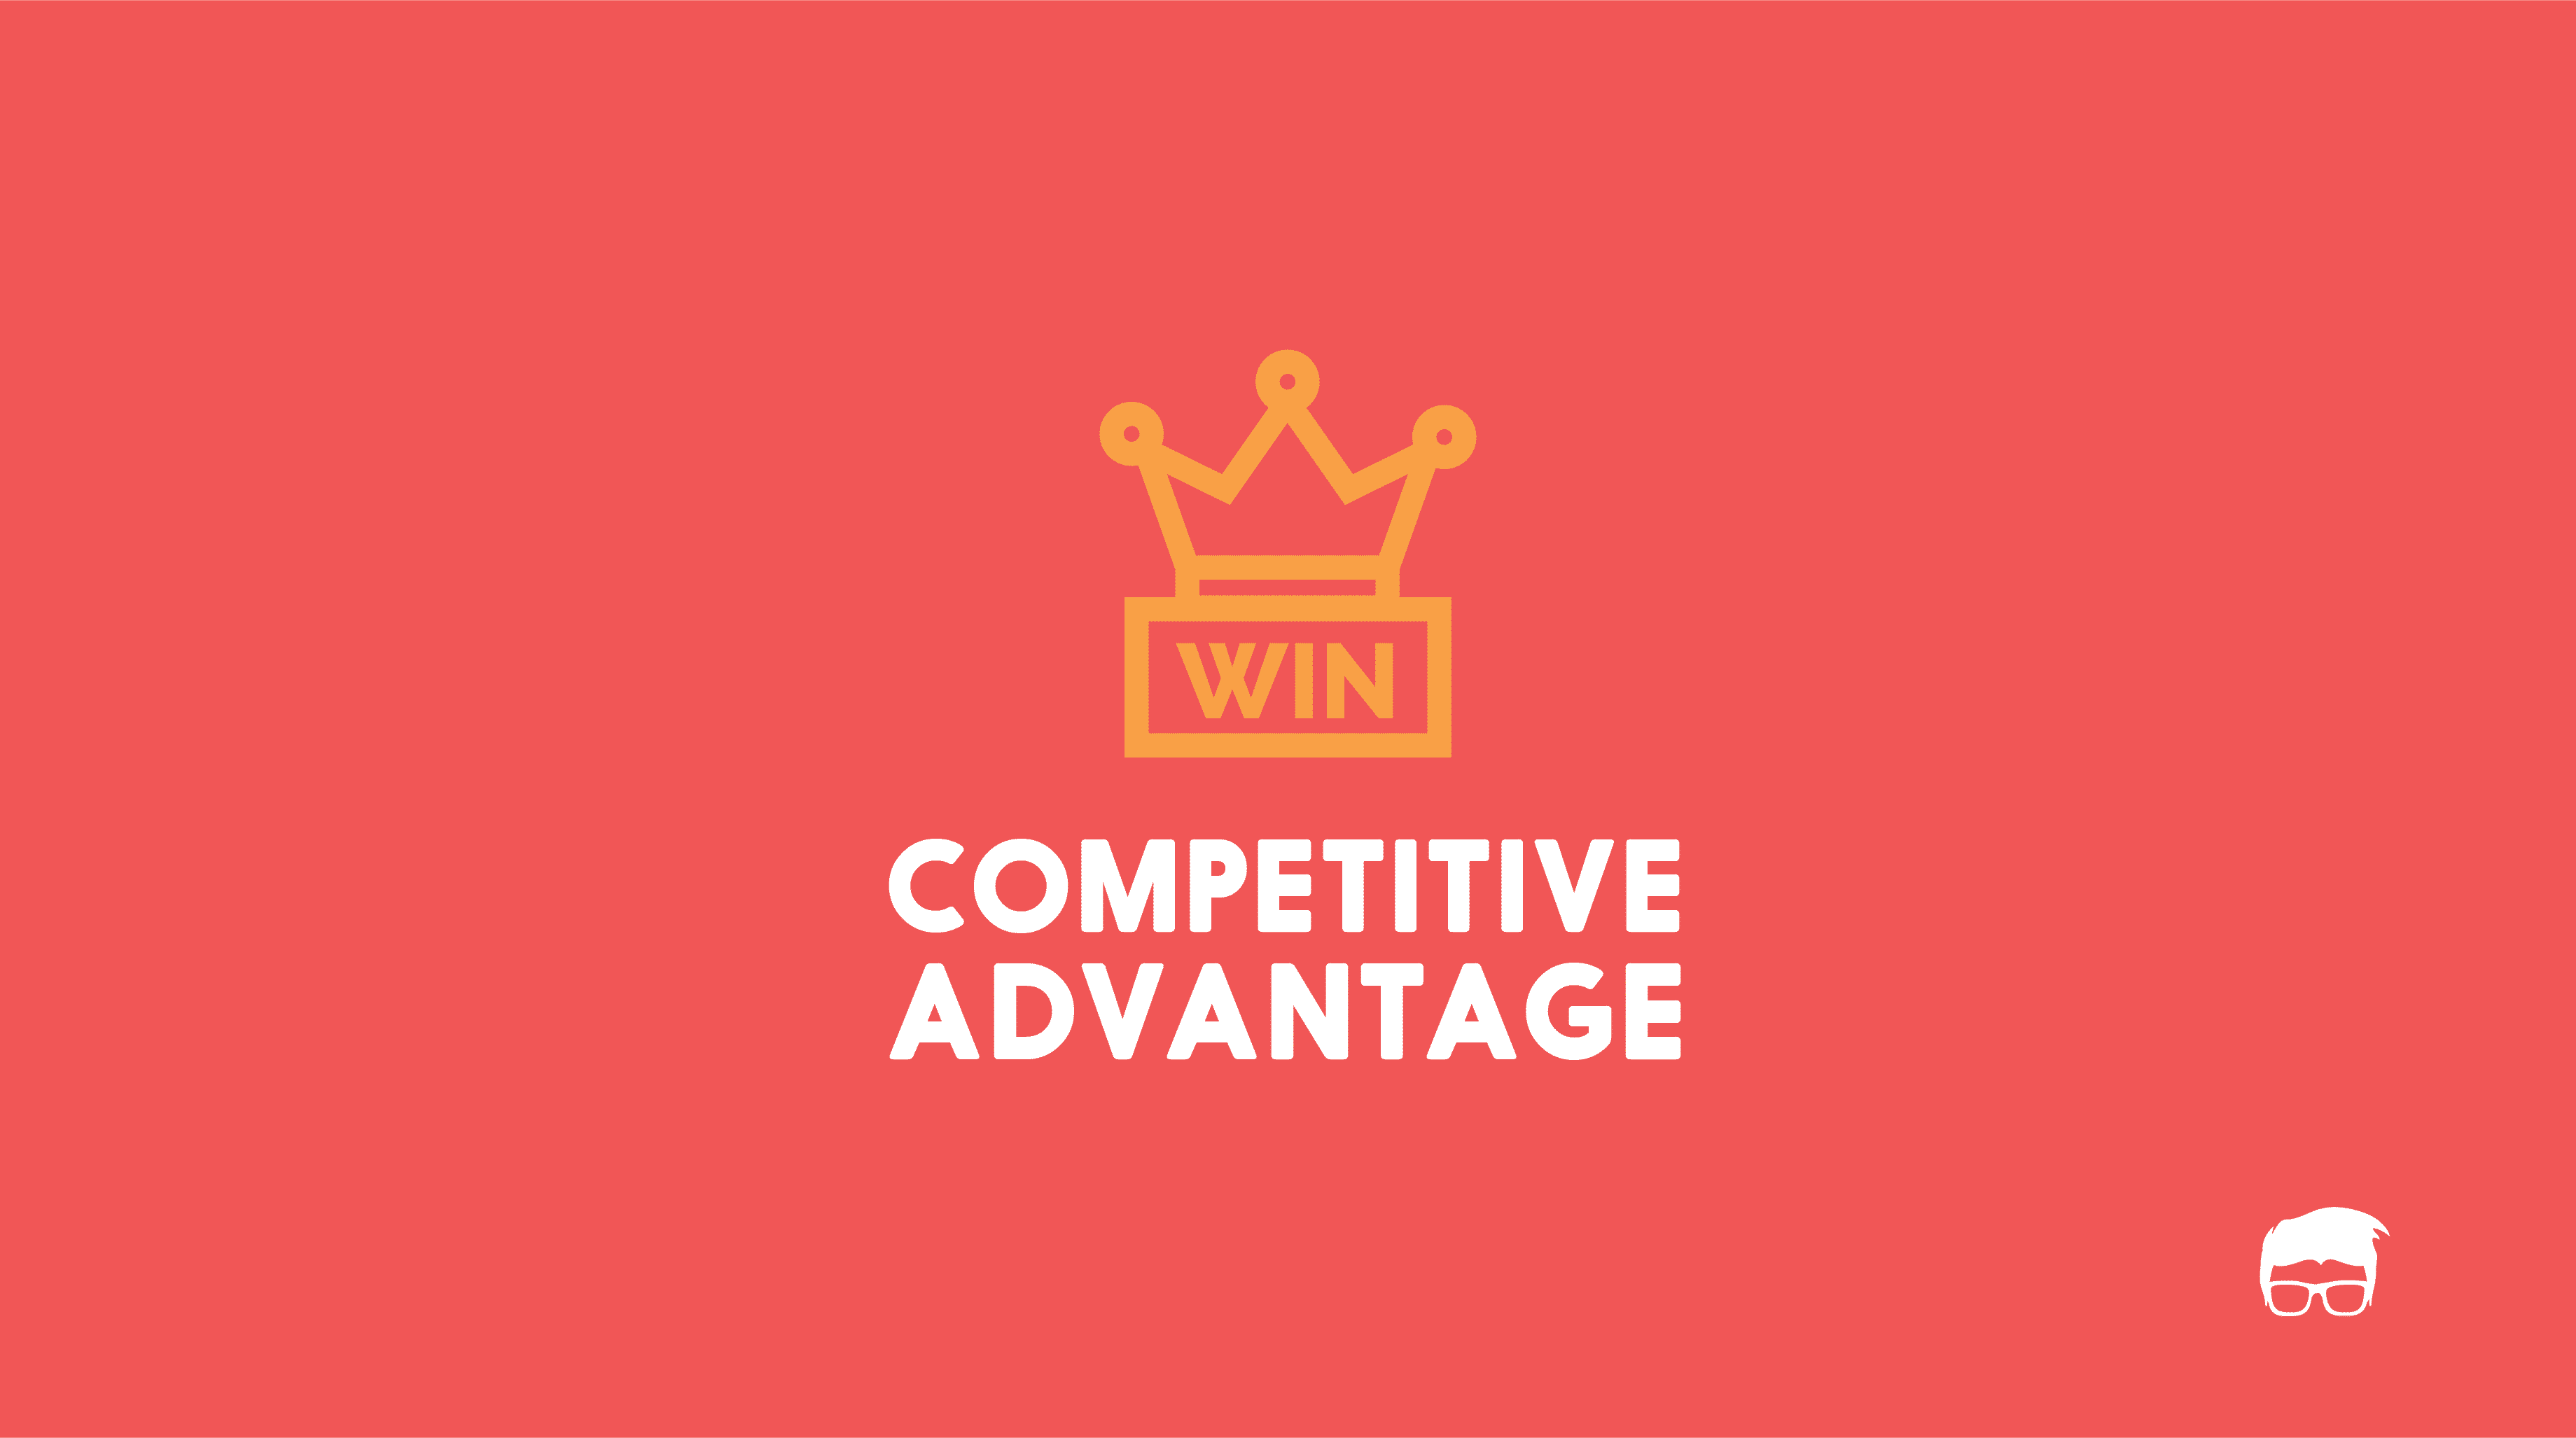 Competitive Advantage - Definition, Types, & Examples